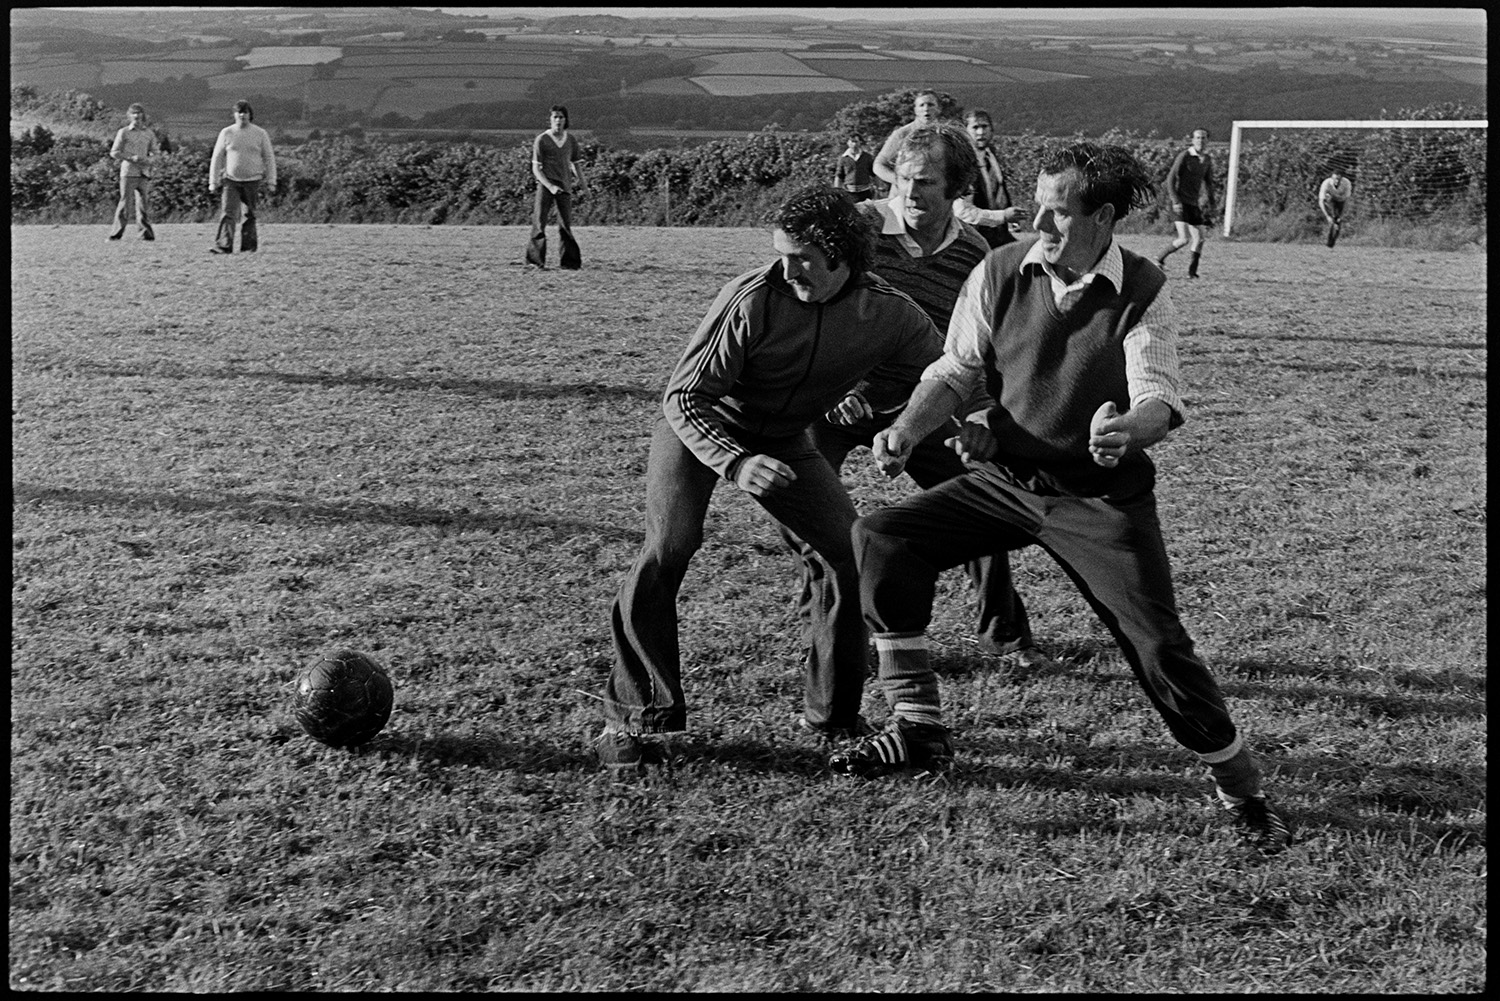 Jubilee football match with spectators. 
[Men playing a football match in Atherington to celebrate the Silver Jubilee of Queen Elizabeth II. Three men are tackling each other for the leather ball. A rural landscape of fields can be seen in the background.]